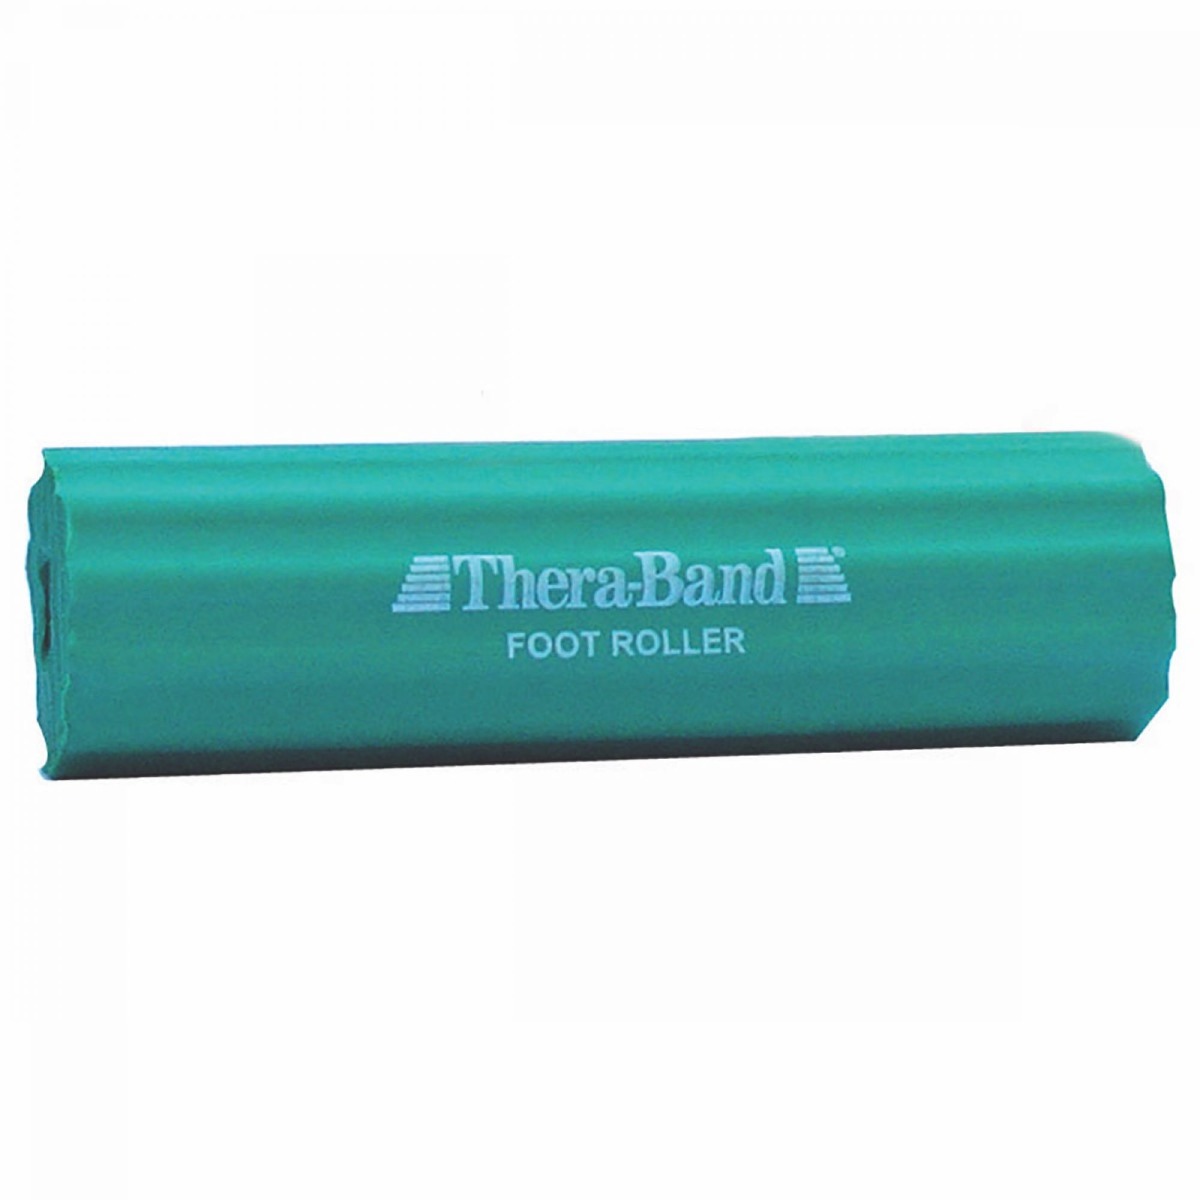 Small green TheraBand Foot Roller with smooth surface ridge